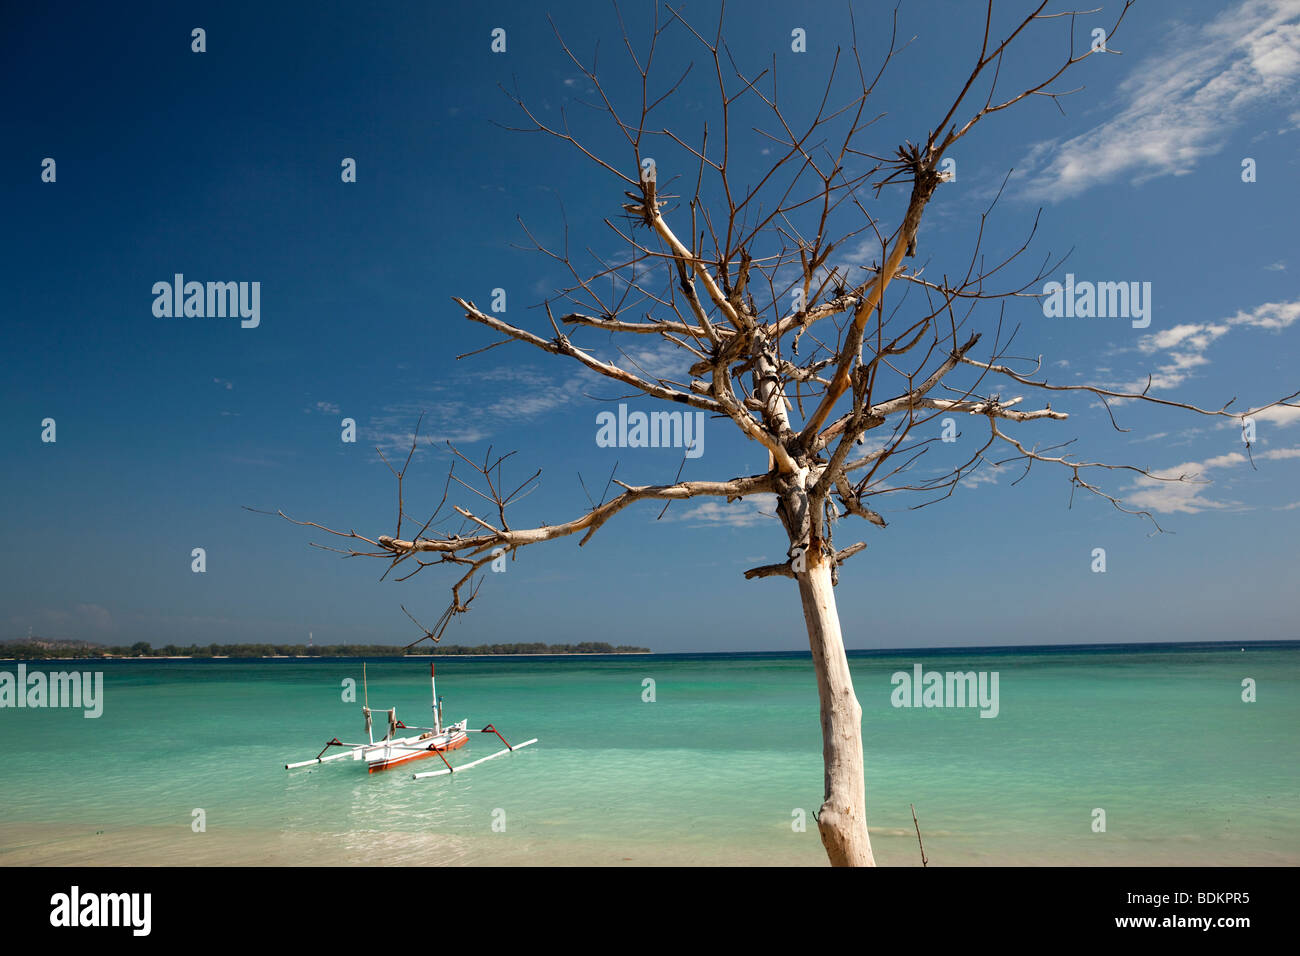 Indonesia, Lombok, Gili Air, white and blue painted outrigger boat moored in idyllic aquamarine sea Stock Photo